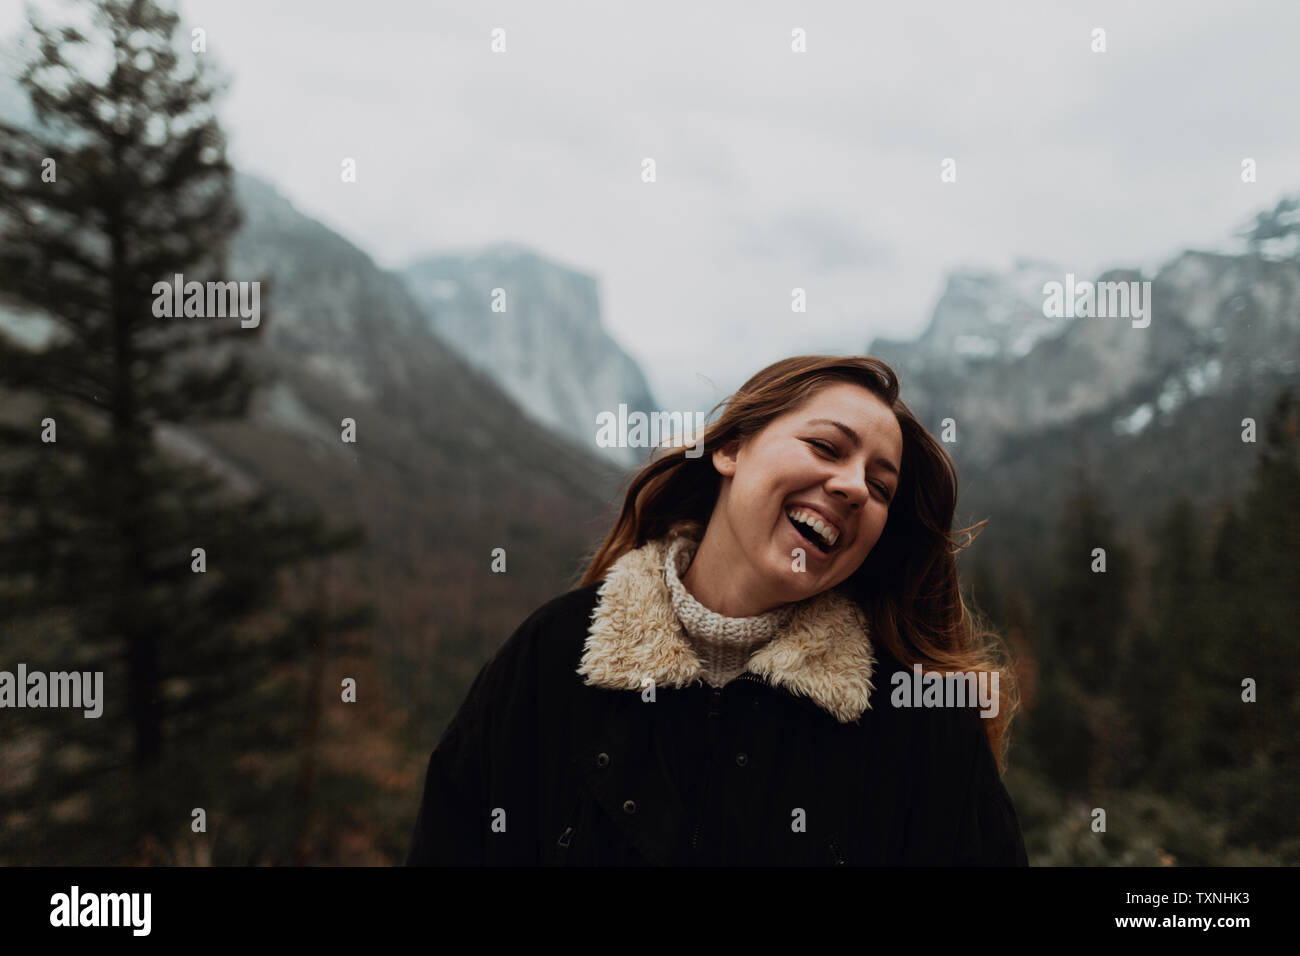 Young woman laughing in mountain landscape, head and shoulders, Yosemite Village, California, USA Stock Photo